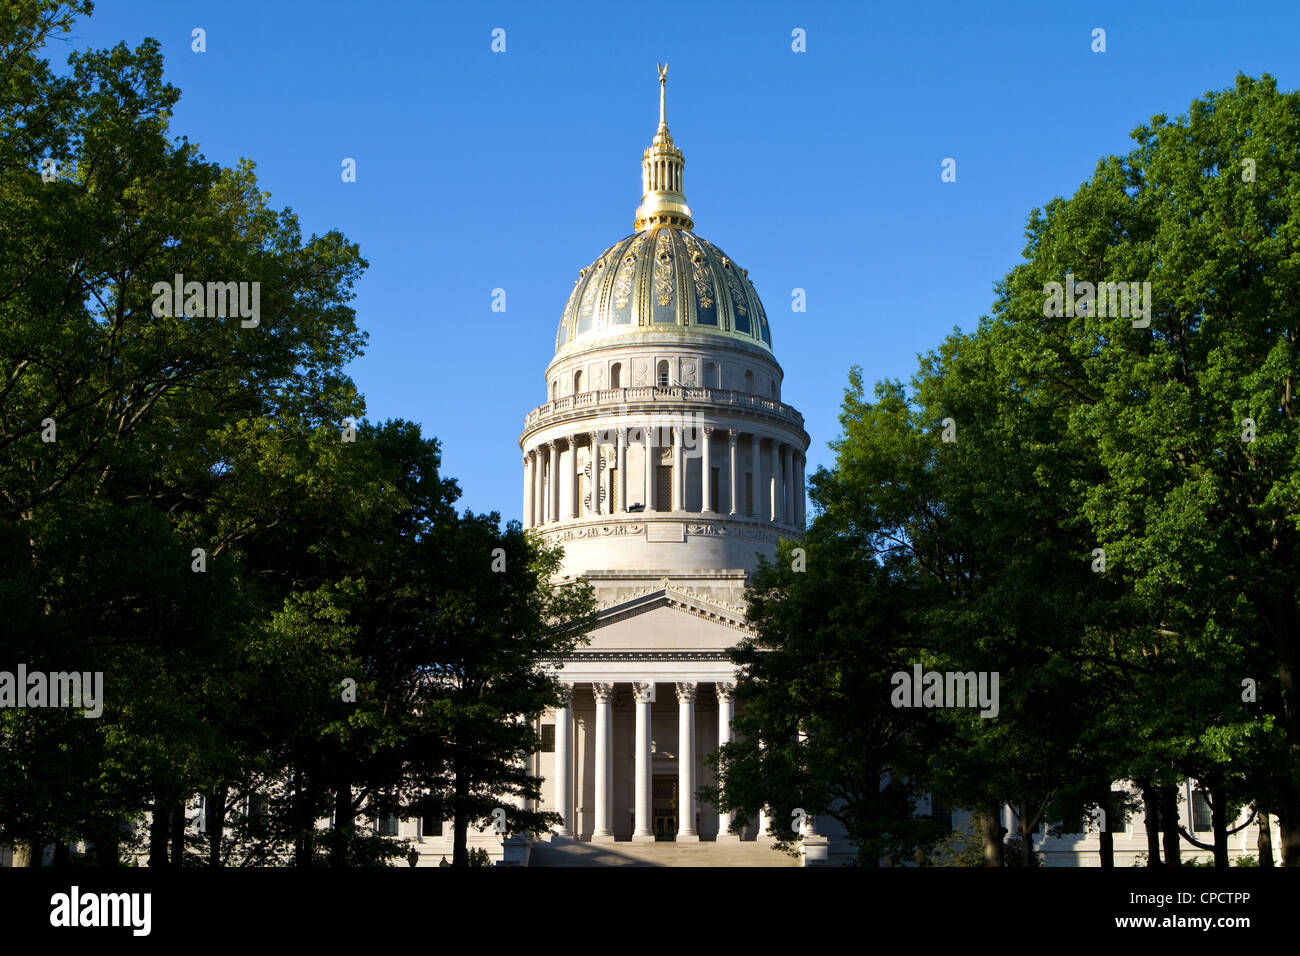 West Virginia State Capitol in Charleston, West Virginia, USA surrounded by trees against a blue sky background. Stock Photo